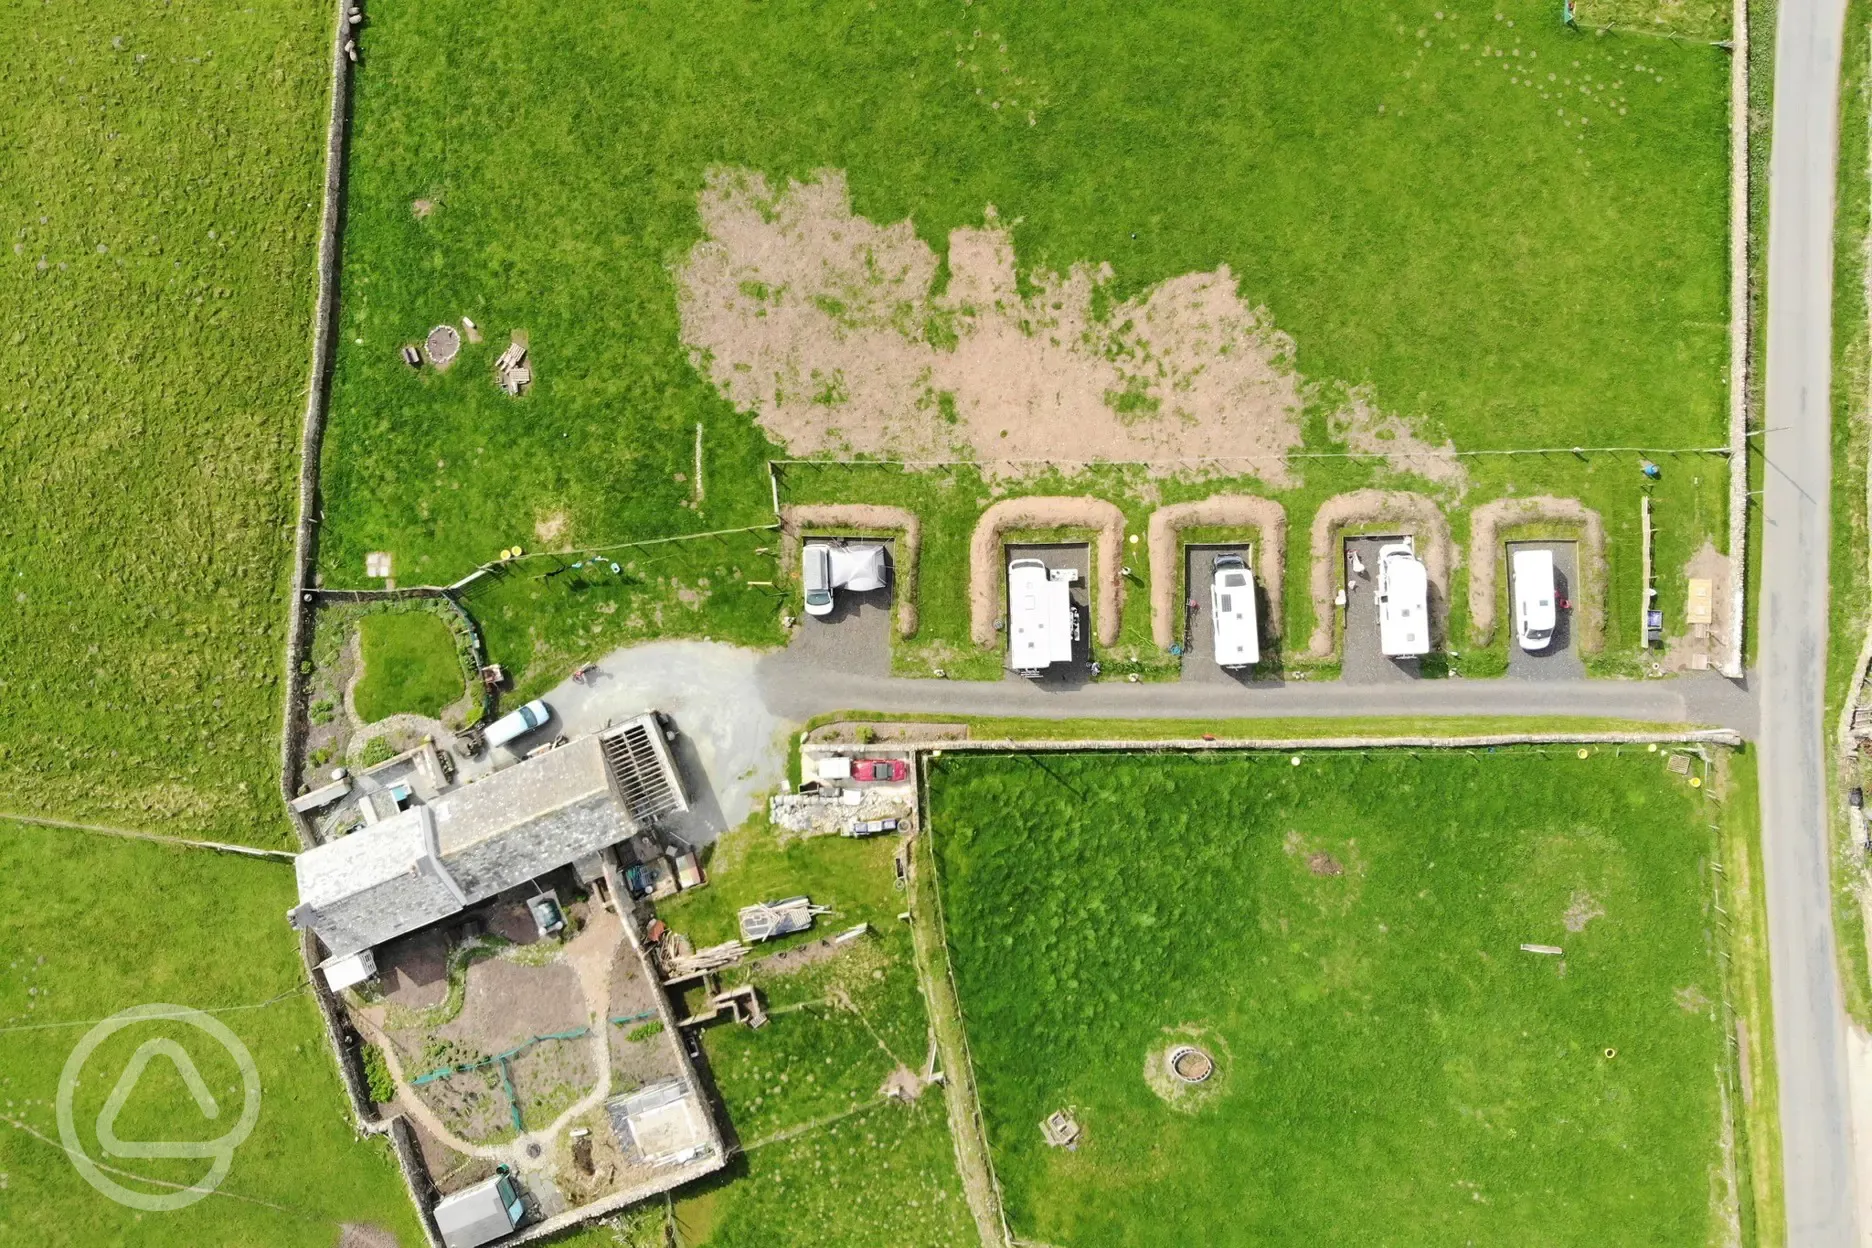 Bird's eye view of the hardstanding pitches